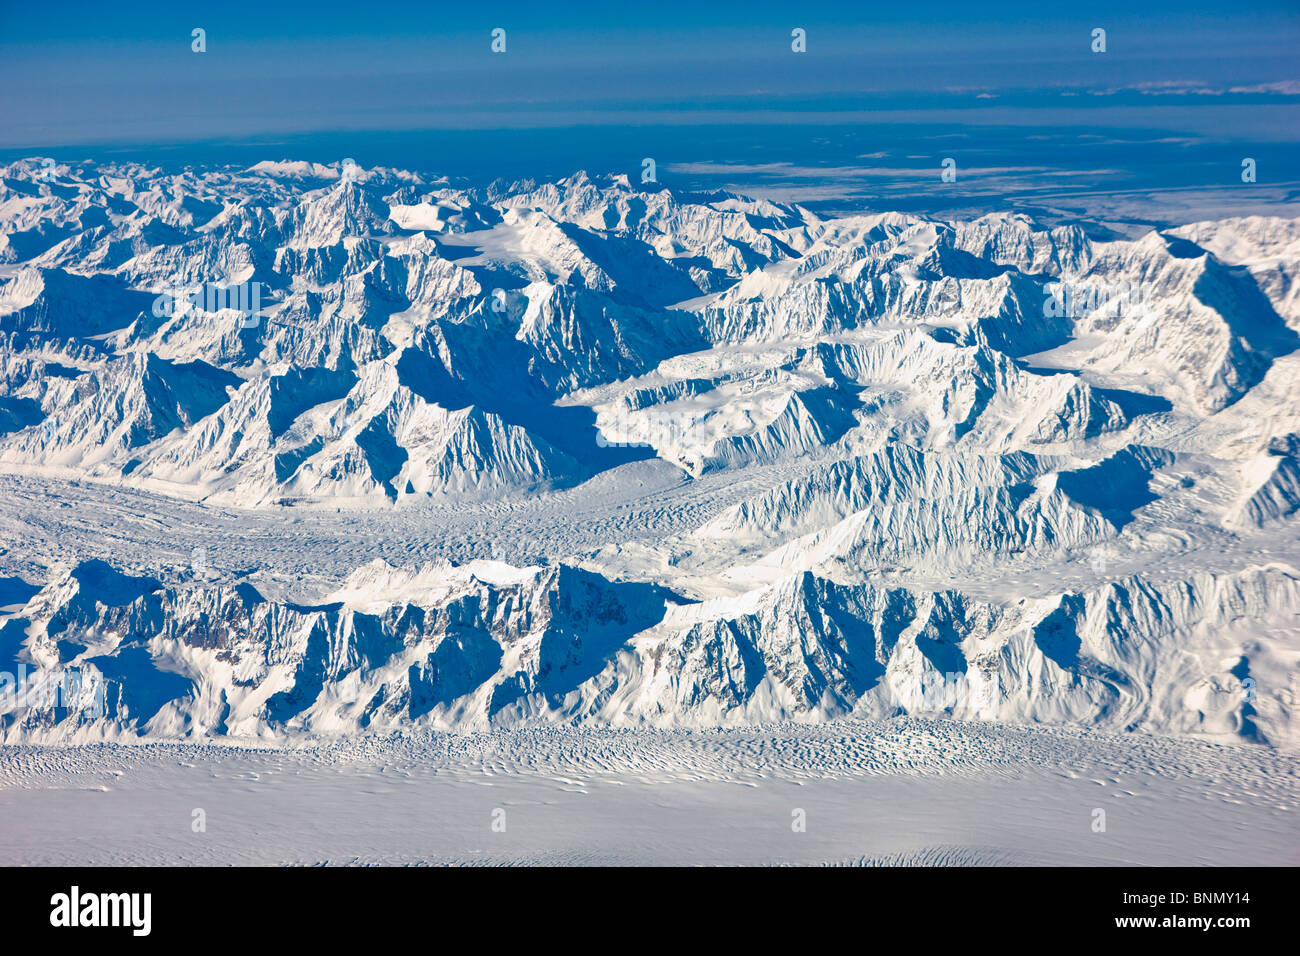 Aerial view of the Alaska Range as seen from the South during Winter, Alaska Stock Photo